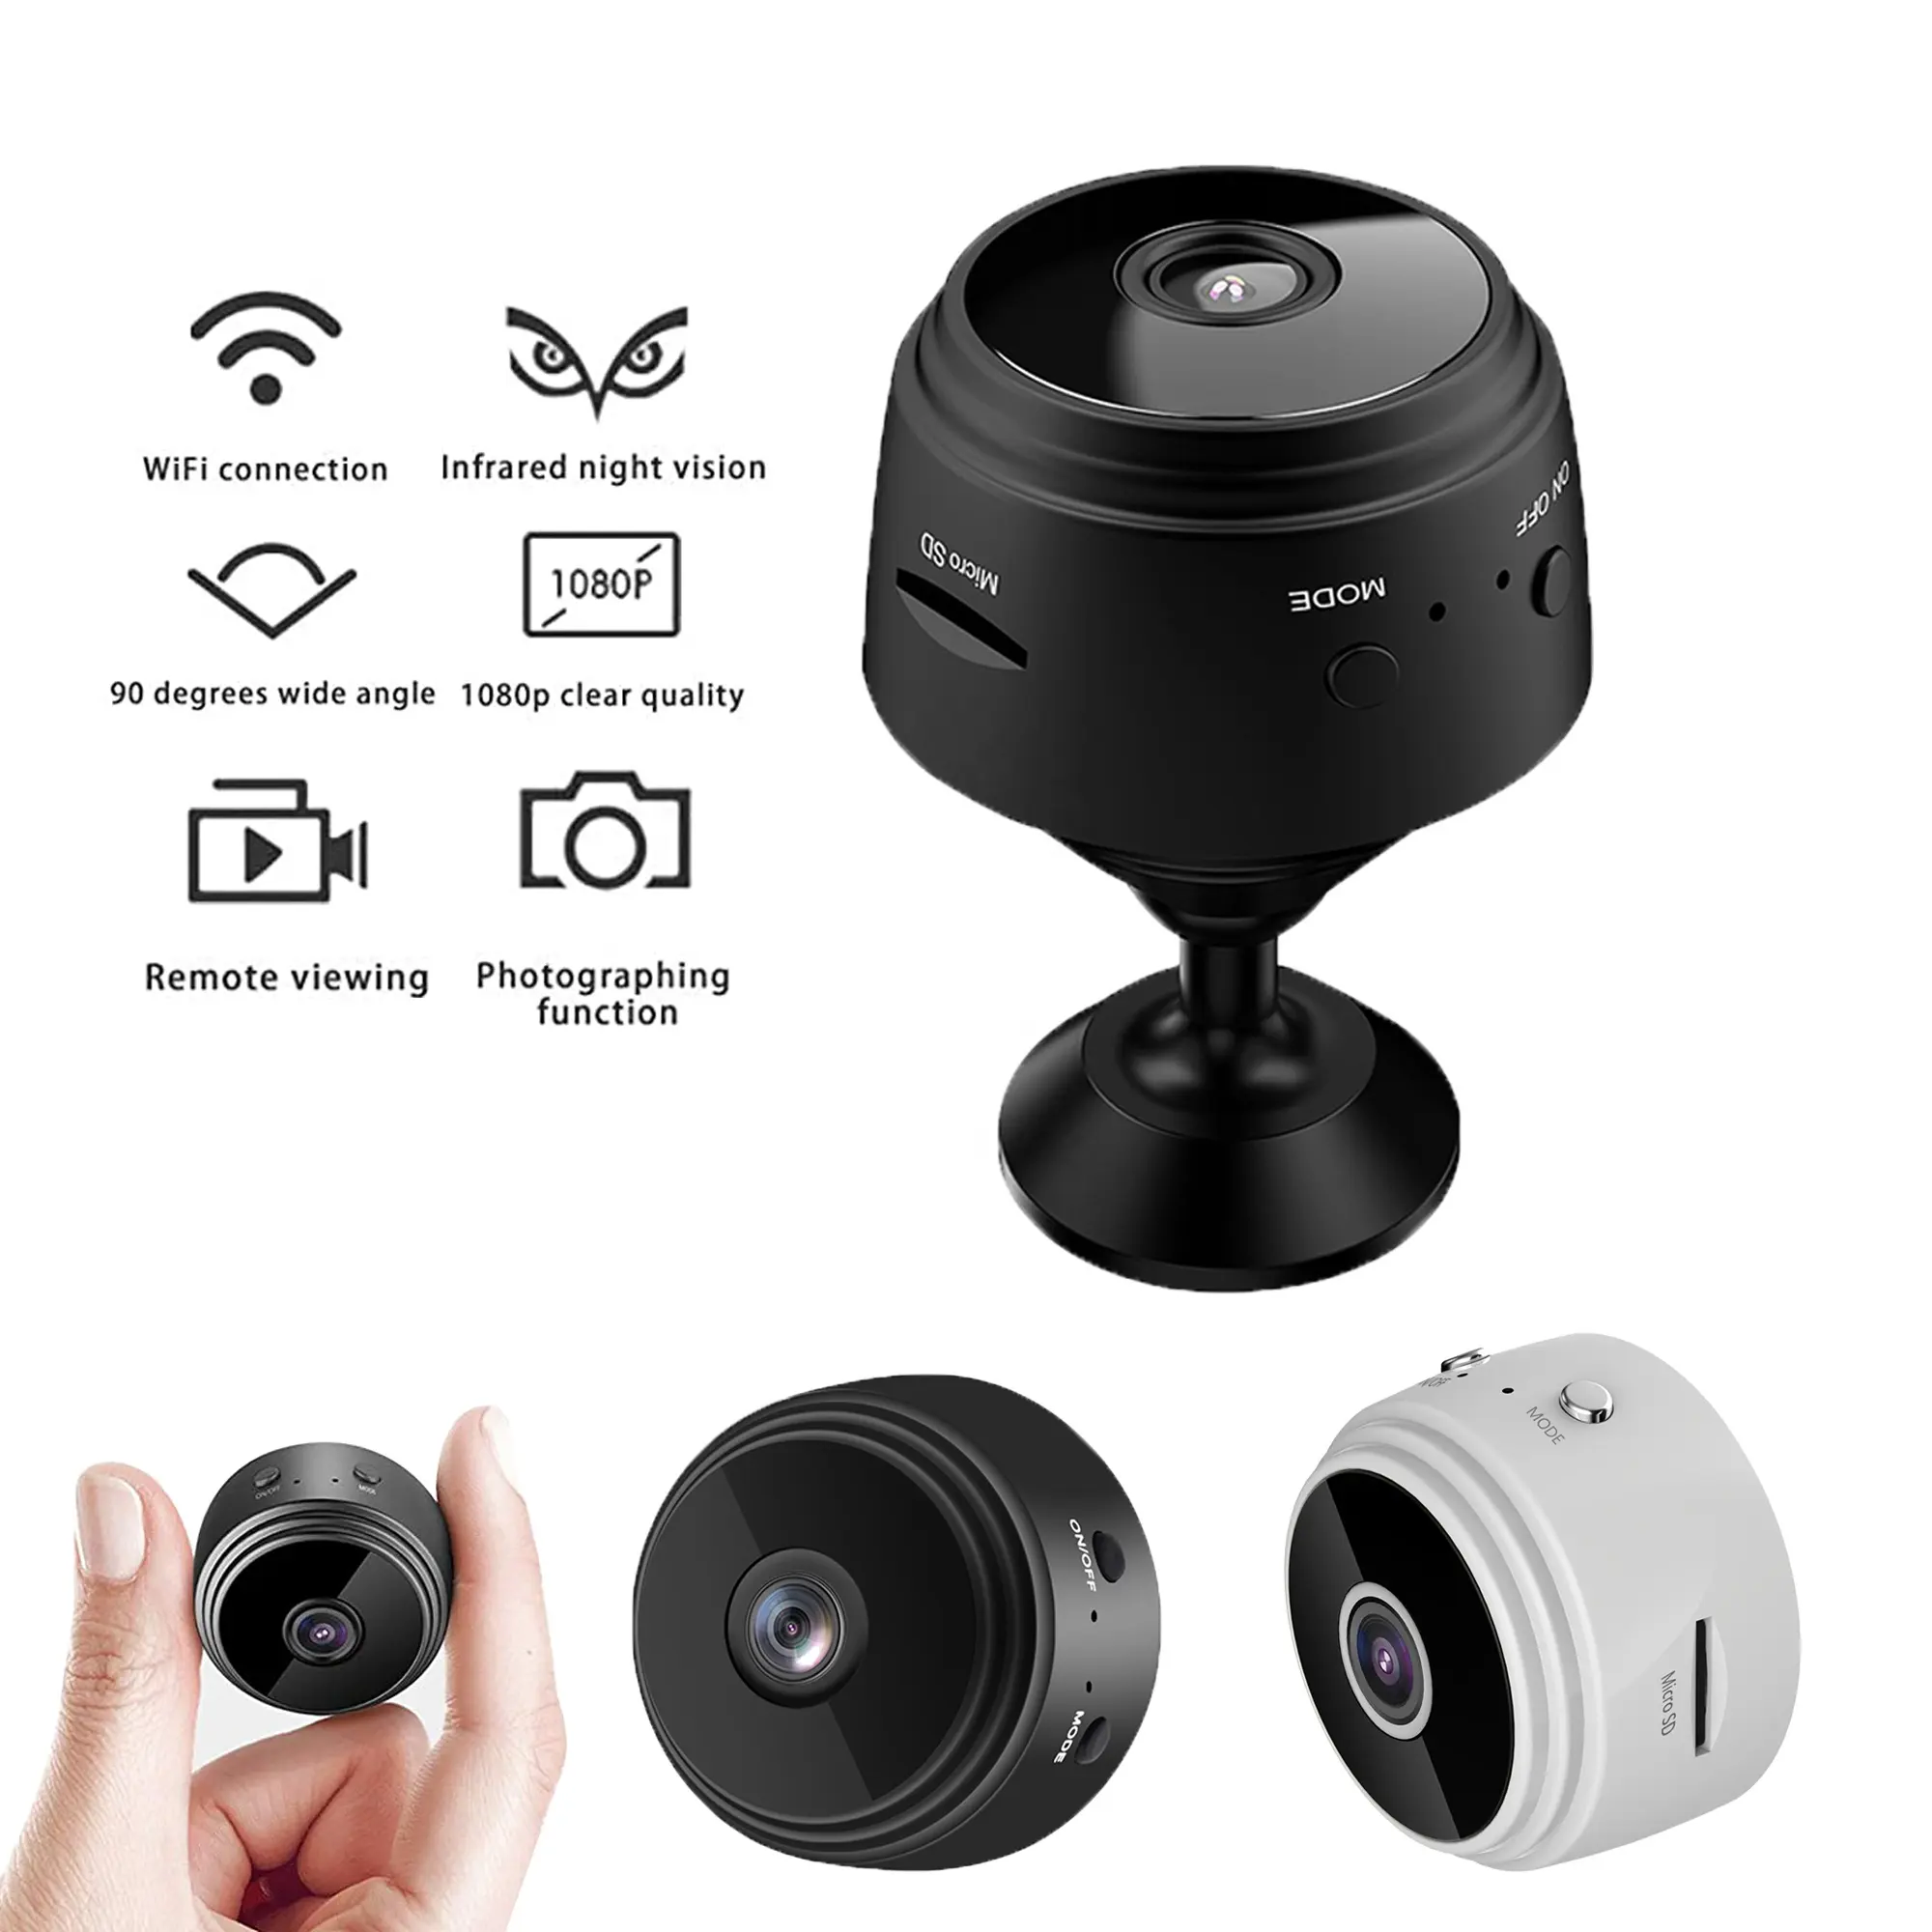 A9 Little Stars Hdwificam Mini Wifi Camera smart Home Full HD 1080P House Wireless Security Micro Camcorder for Amazon eBay